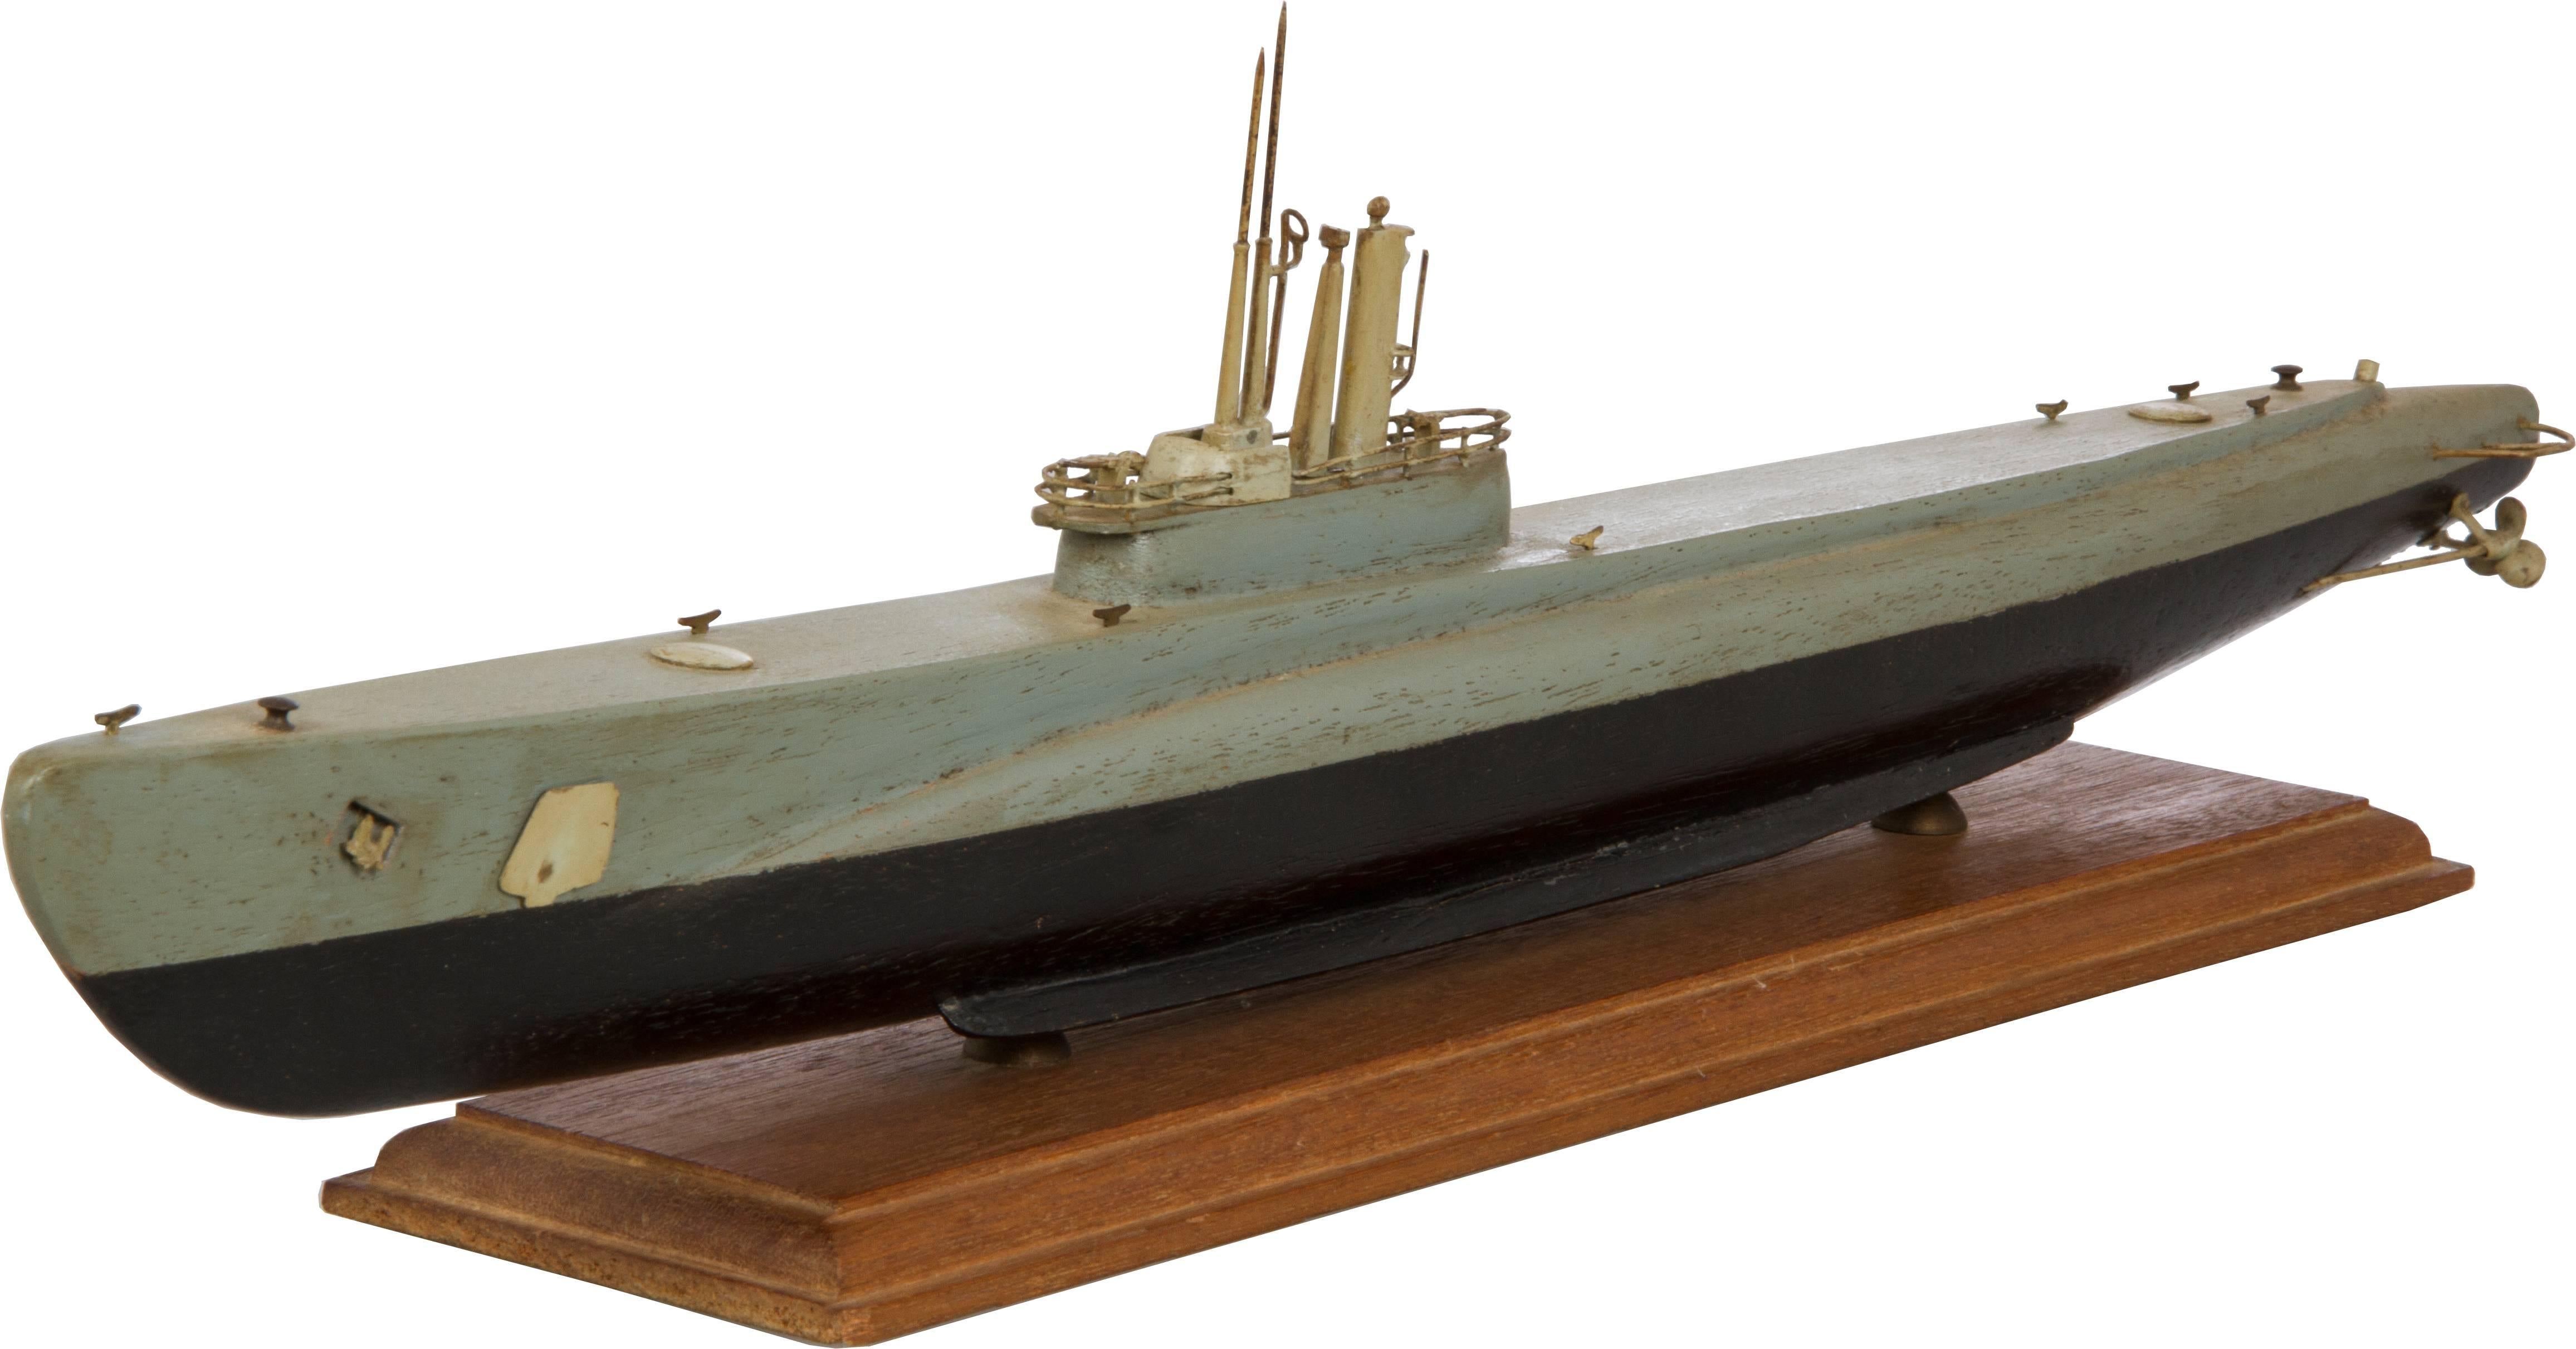 This is a handmade model of a US submarine mounted on its original stand.